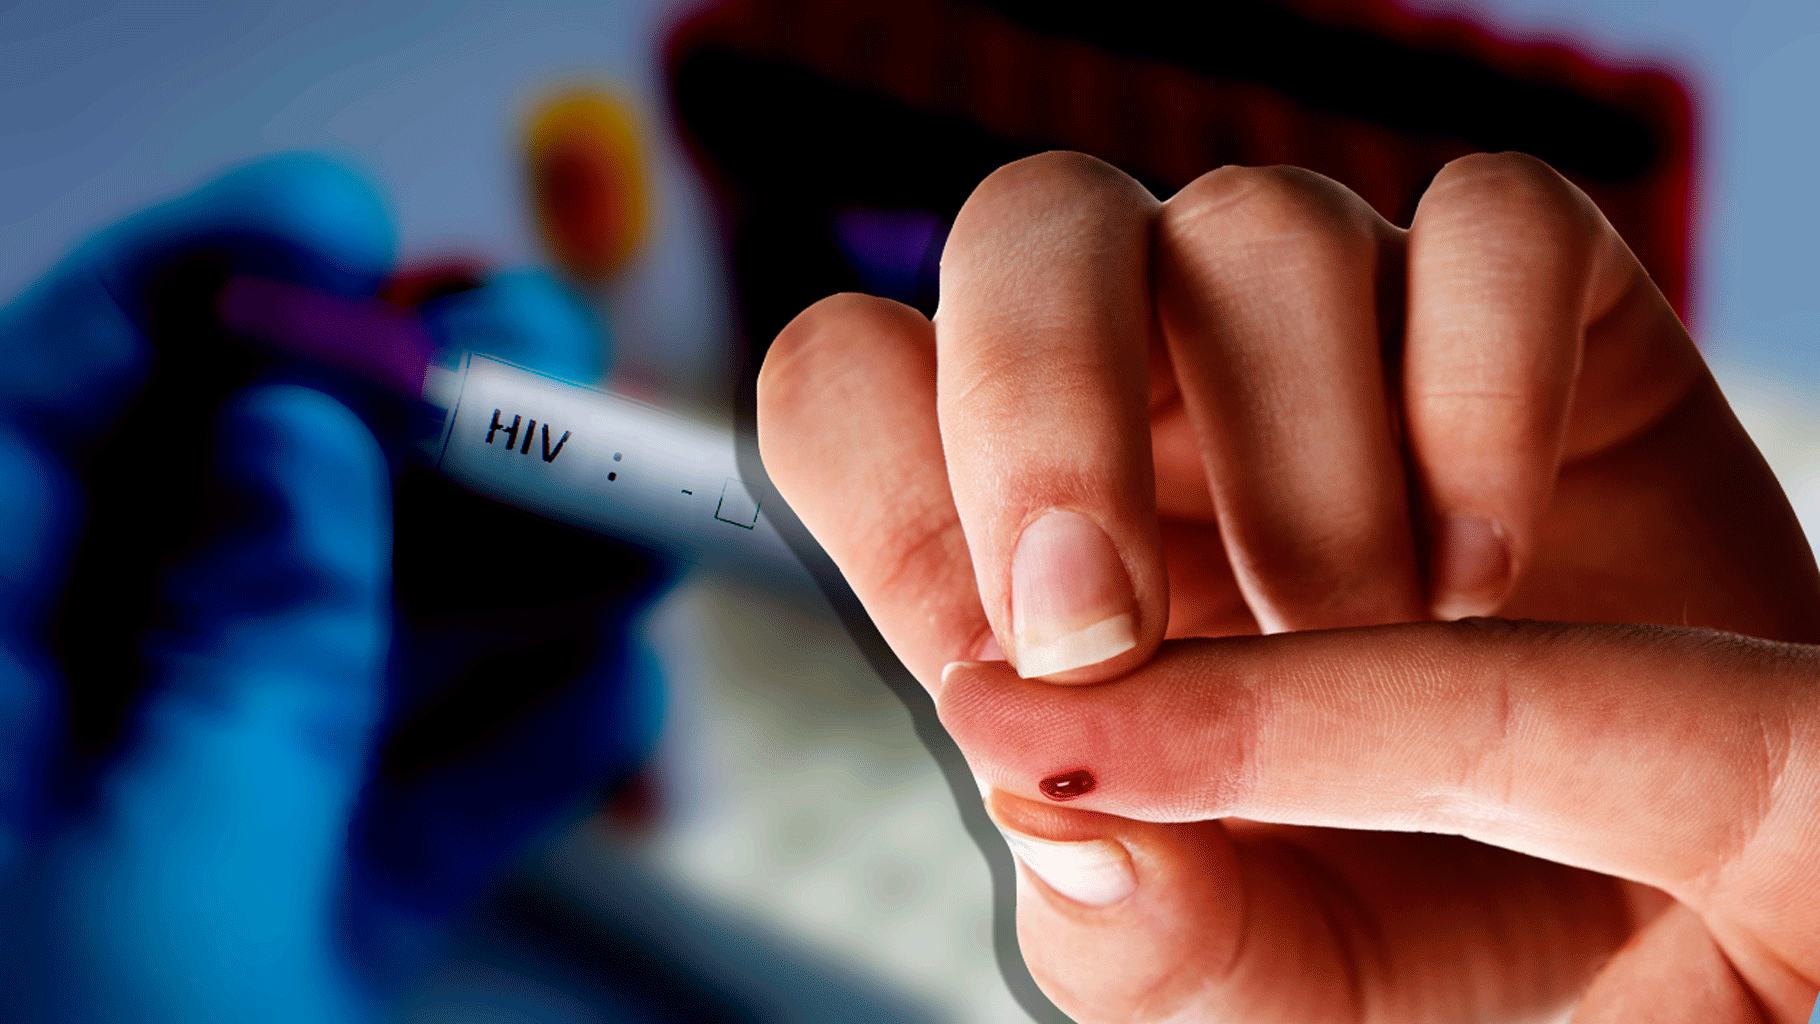 The WHO-approved HIV home testing kits are 99.7 percent accurate. What’s stopping India from adopting it in its HIV-prevention programme? (Photo: iStock; Image altered by <b>The Quint</b>)